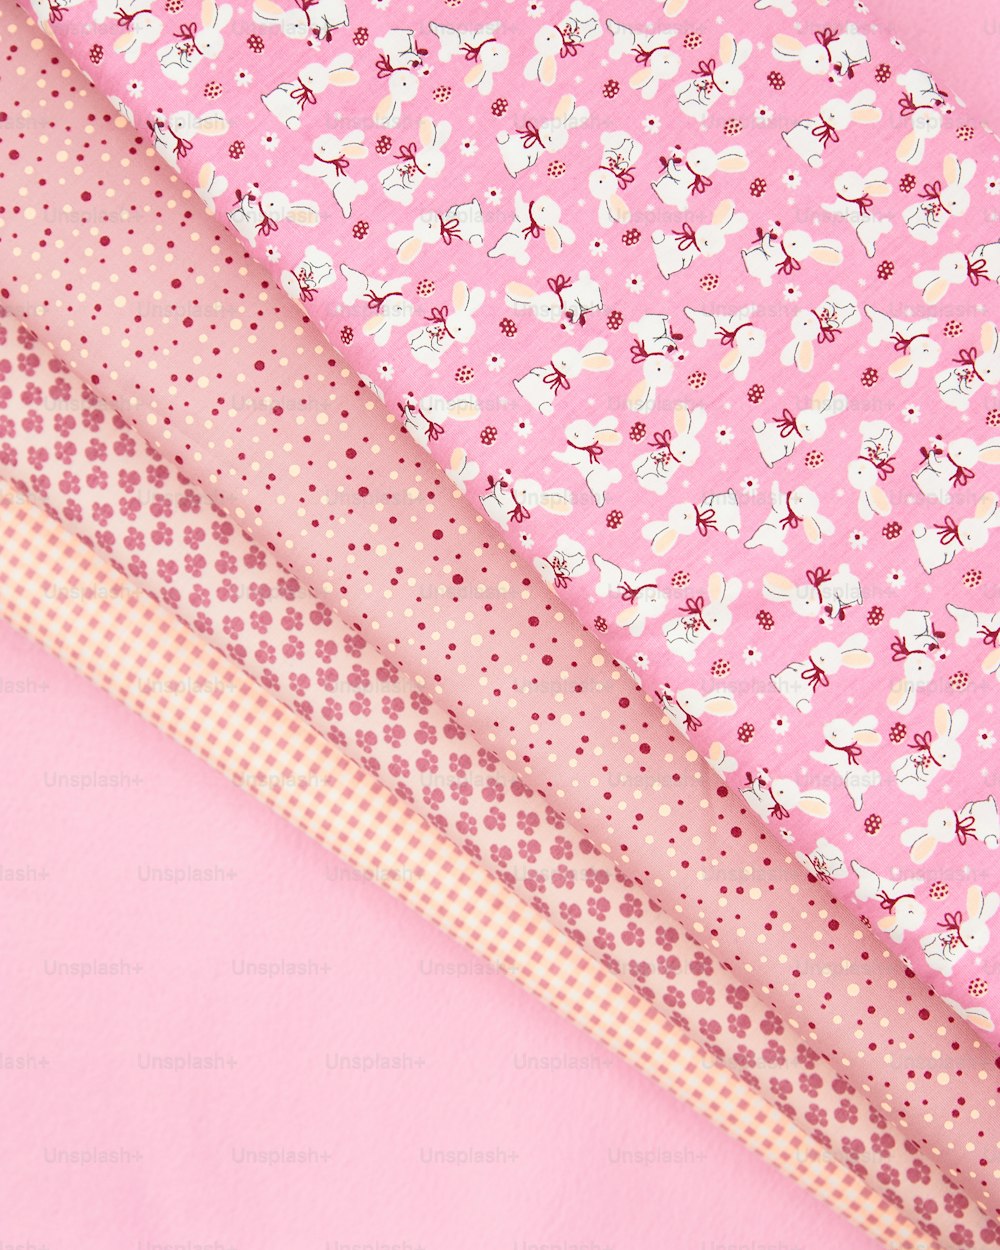 a close up of a pink background with different patterns